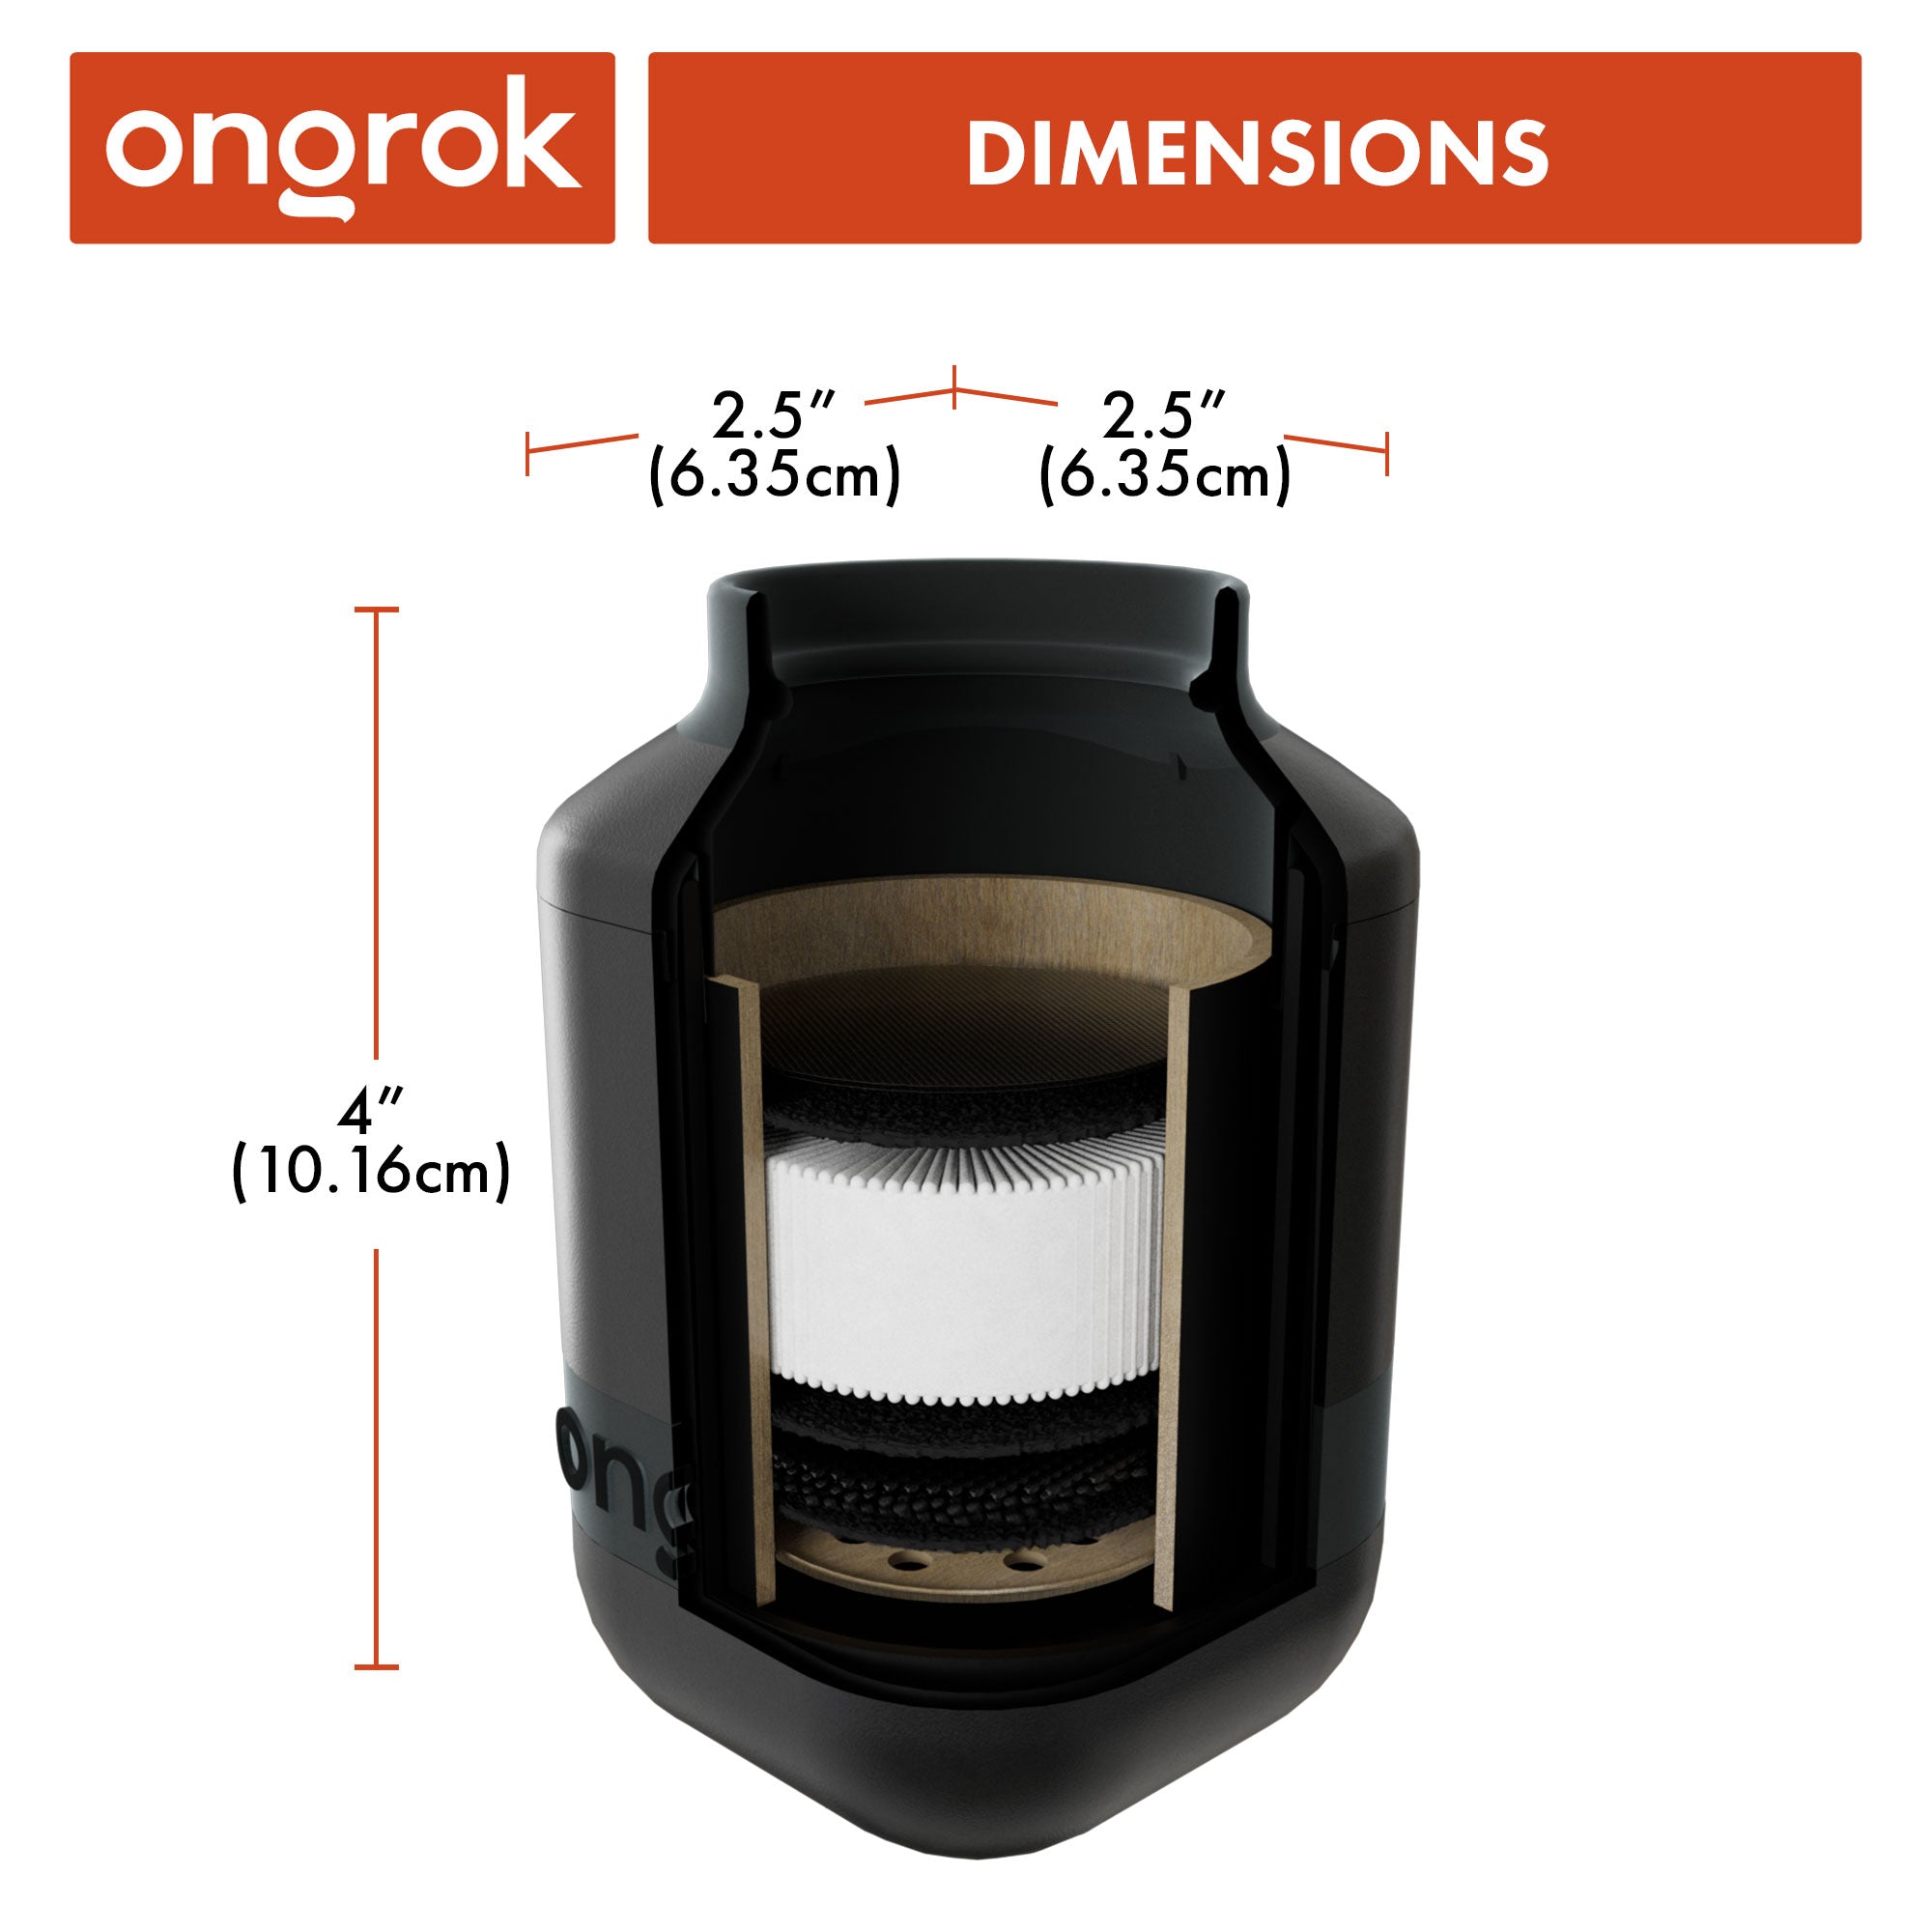 Ongrok Personal Air Filter with Replaceable Cartridges